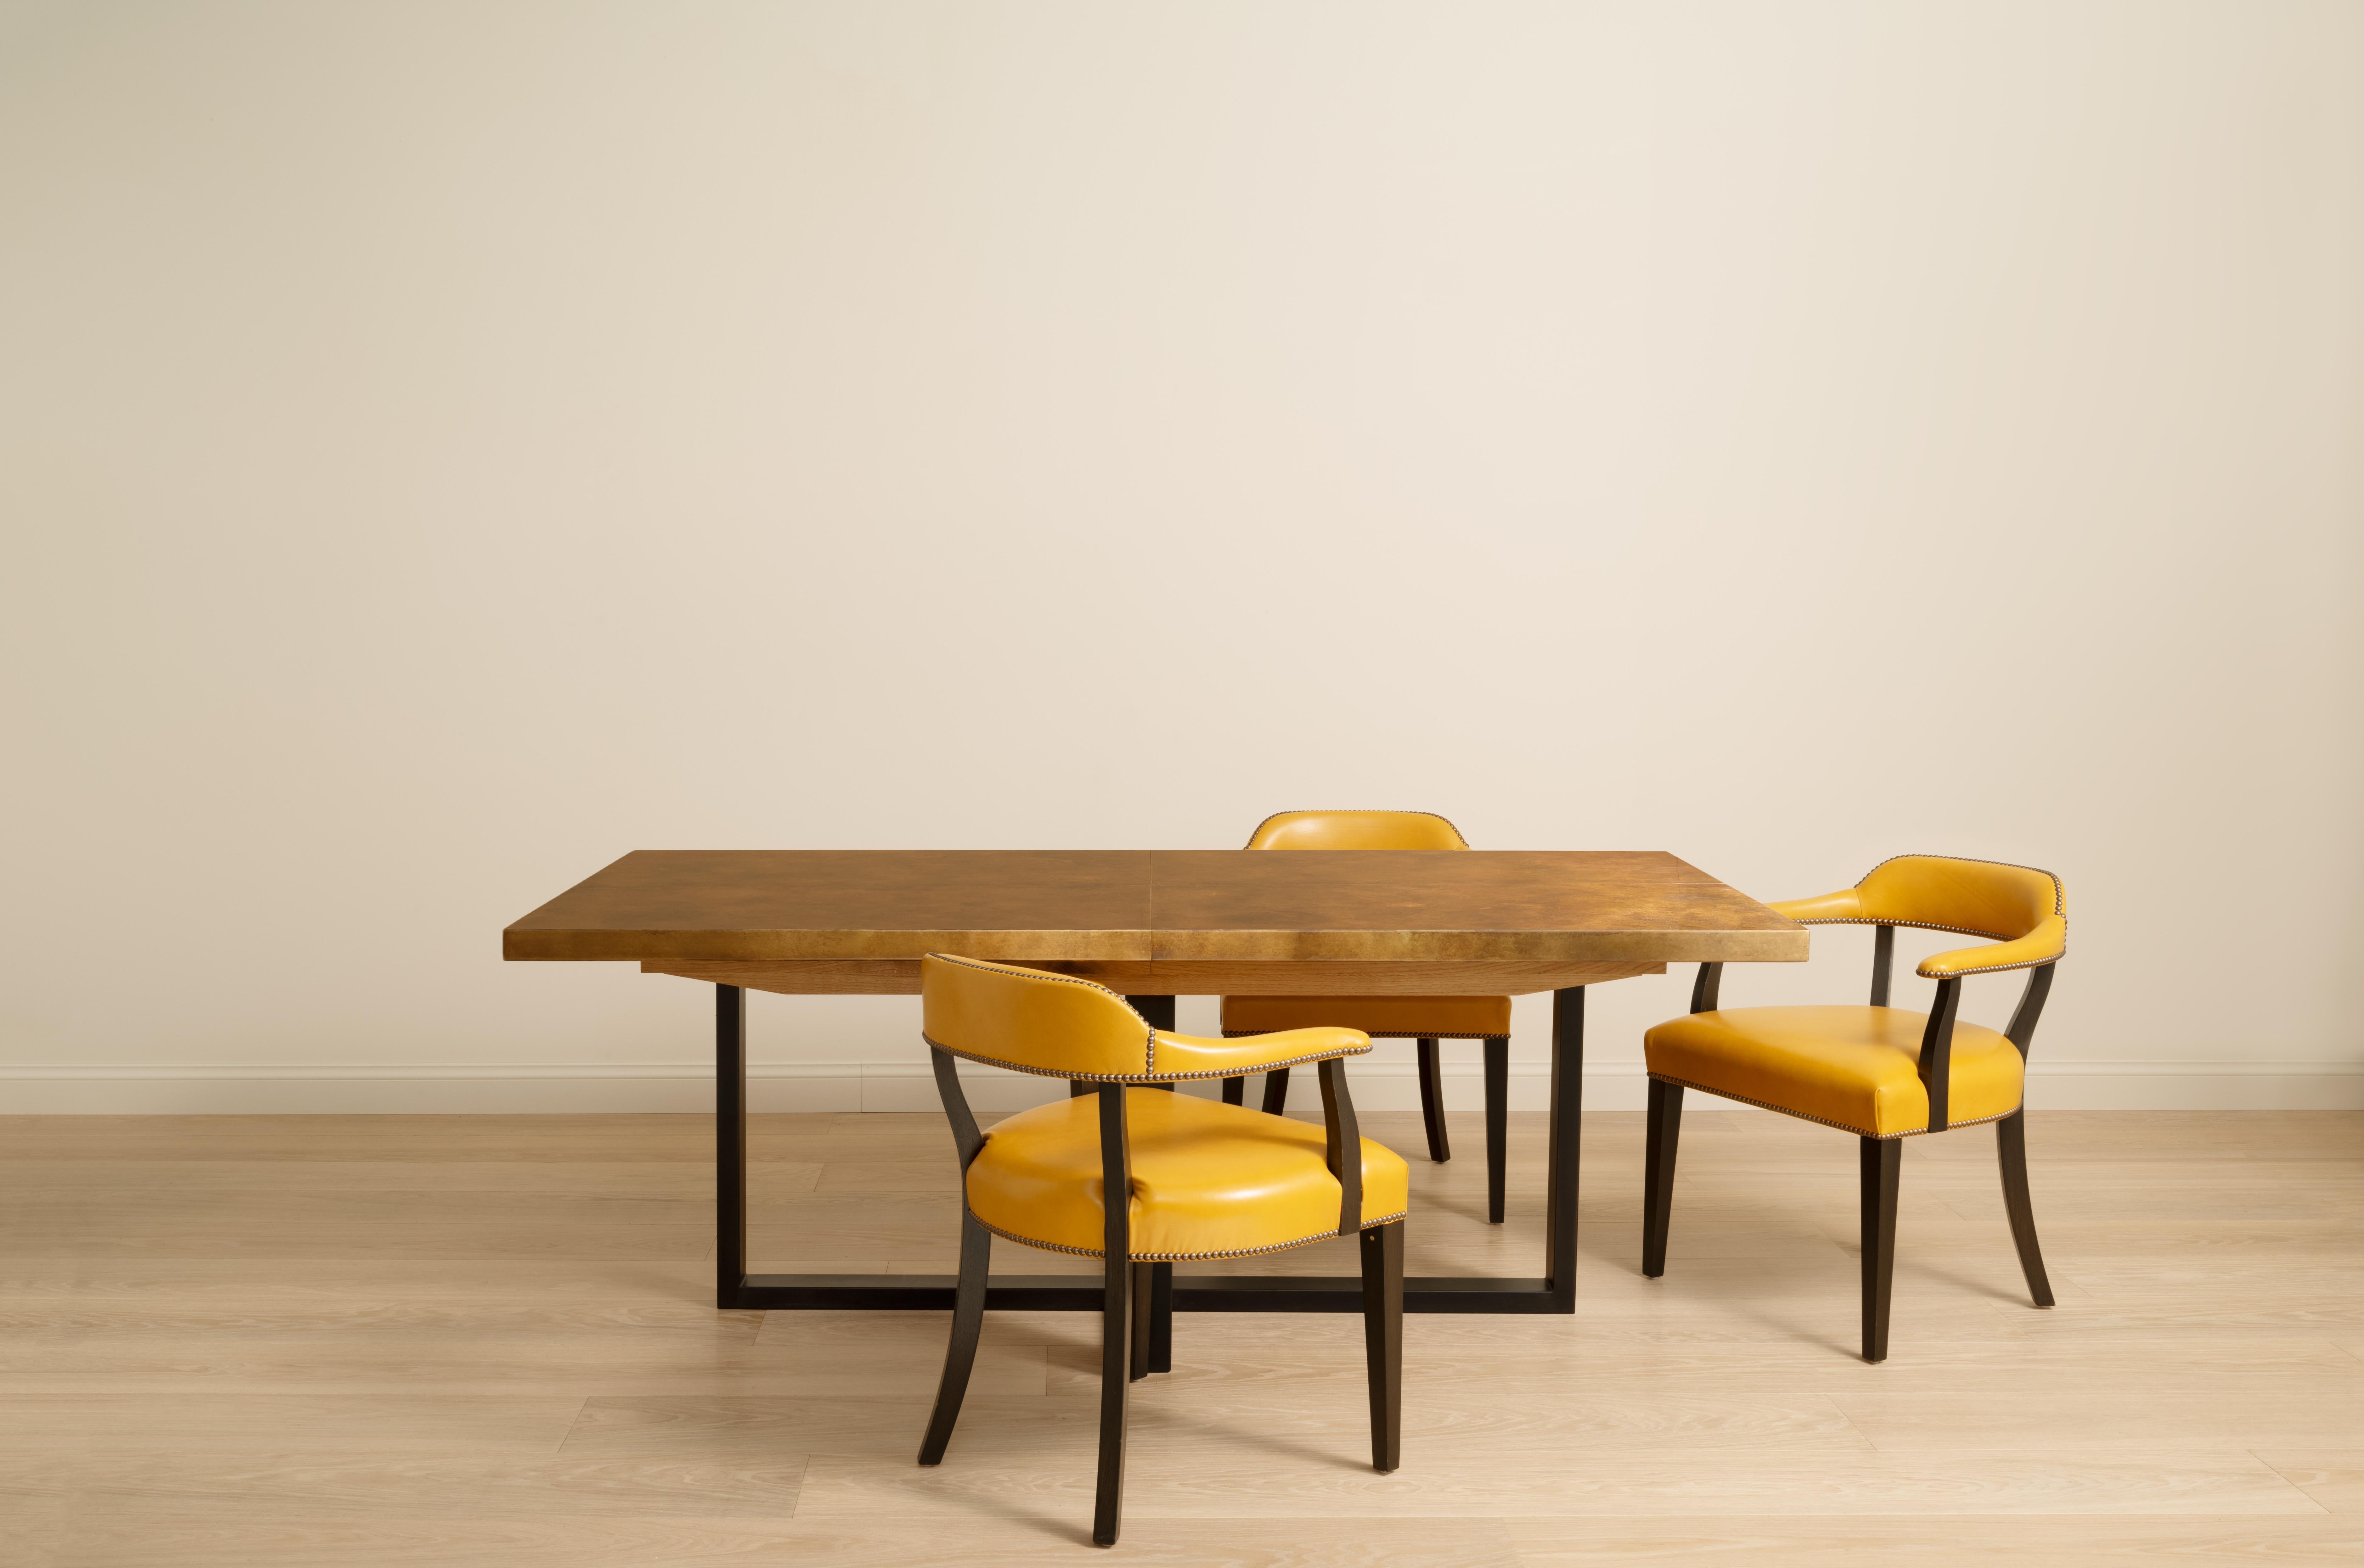 The Denver Dining table is our patinated brass wrapped top and steel base extendable table. With the inclusion of two table leaves, this impressive dining table can seat up to 10 people comfortably when extended. Also available in Copper and